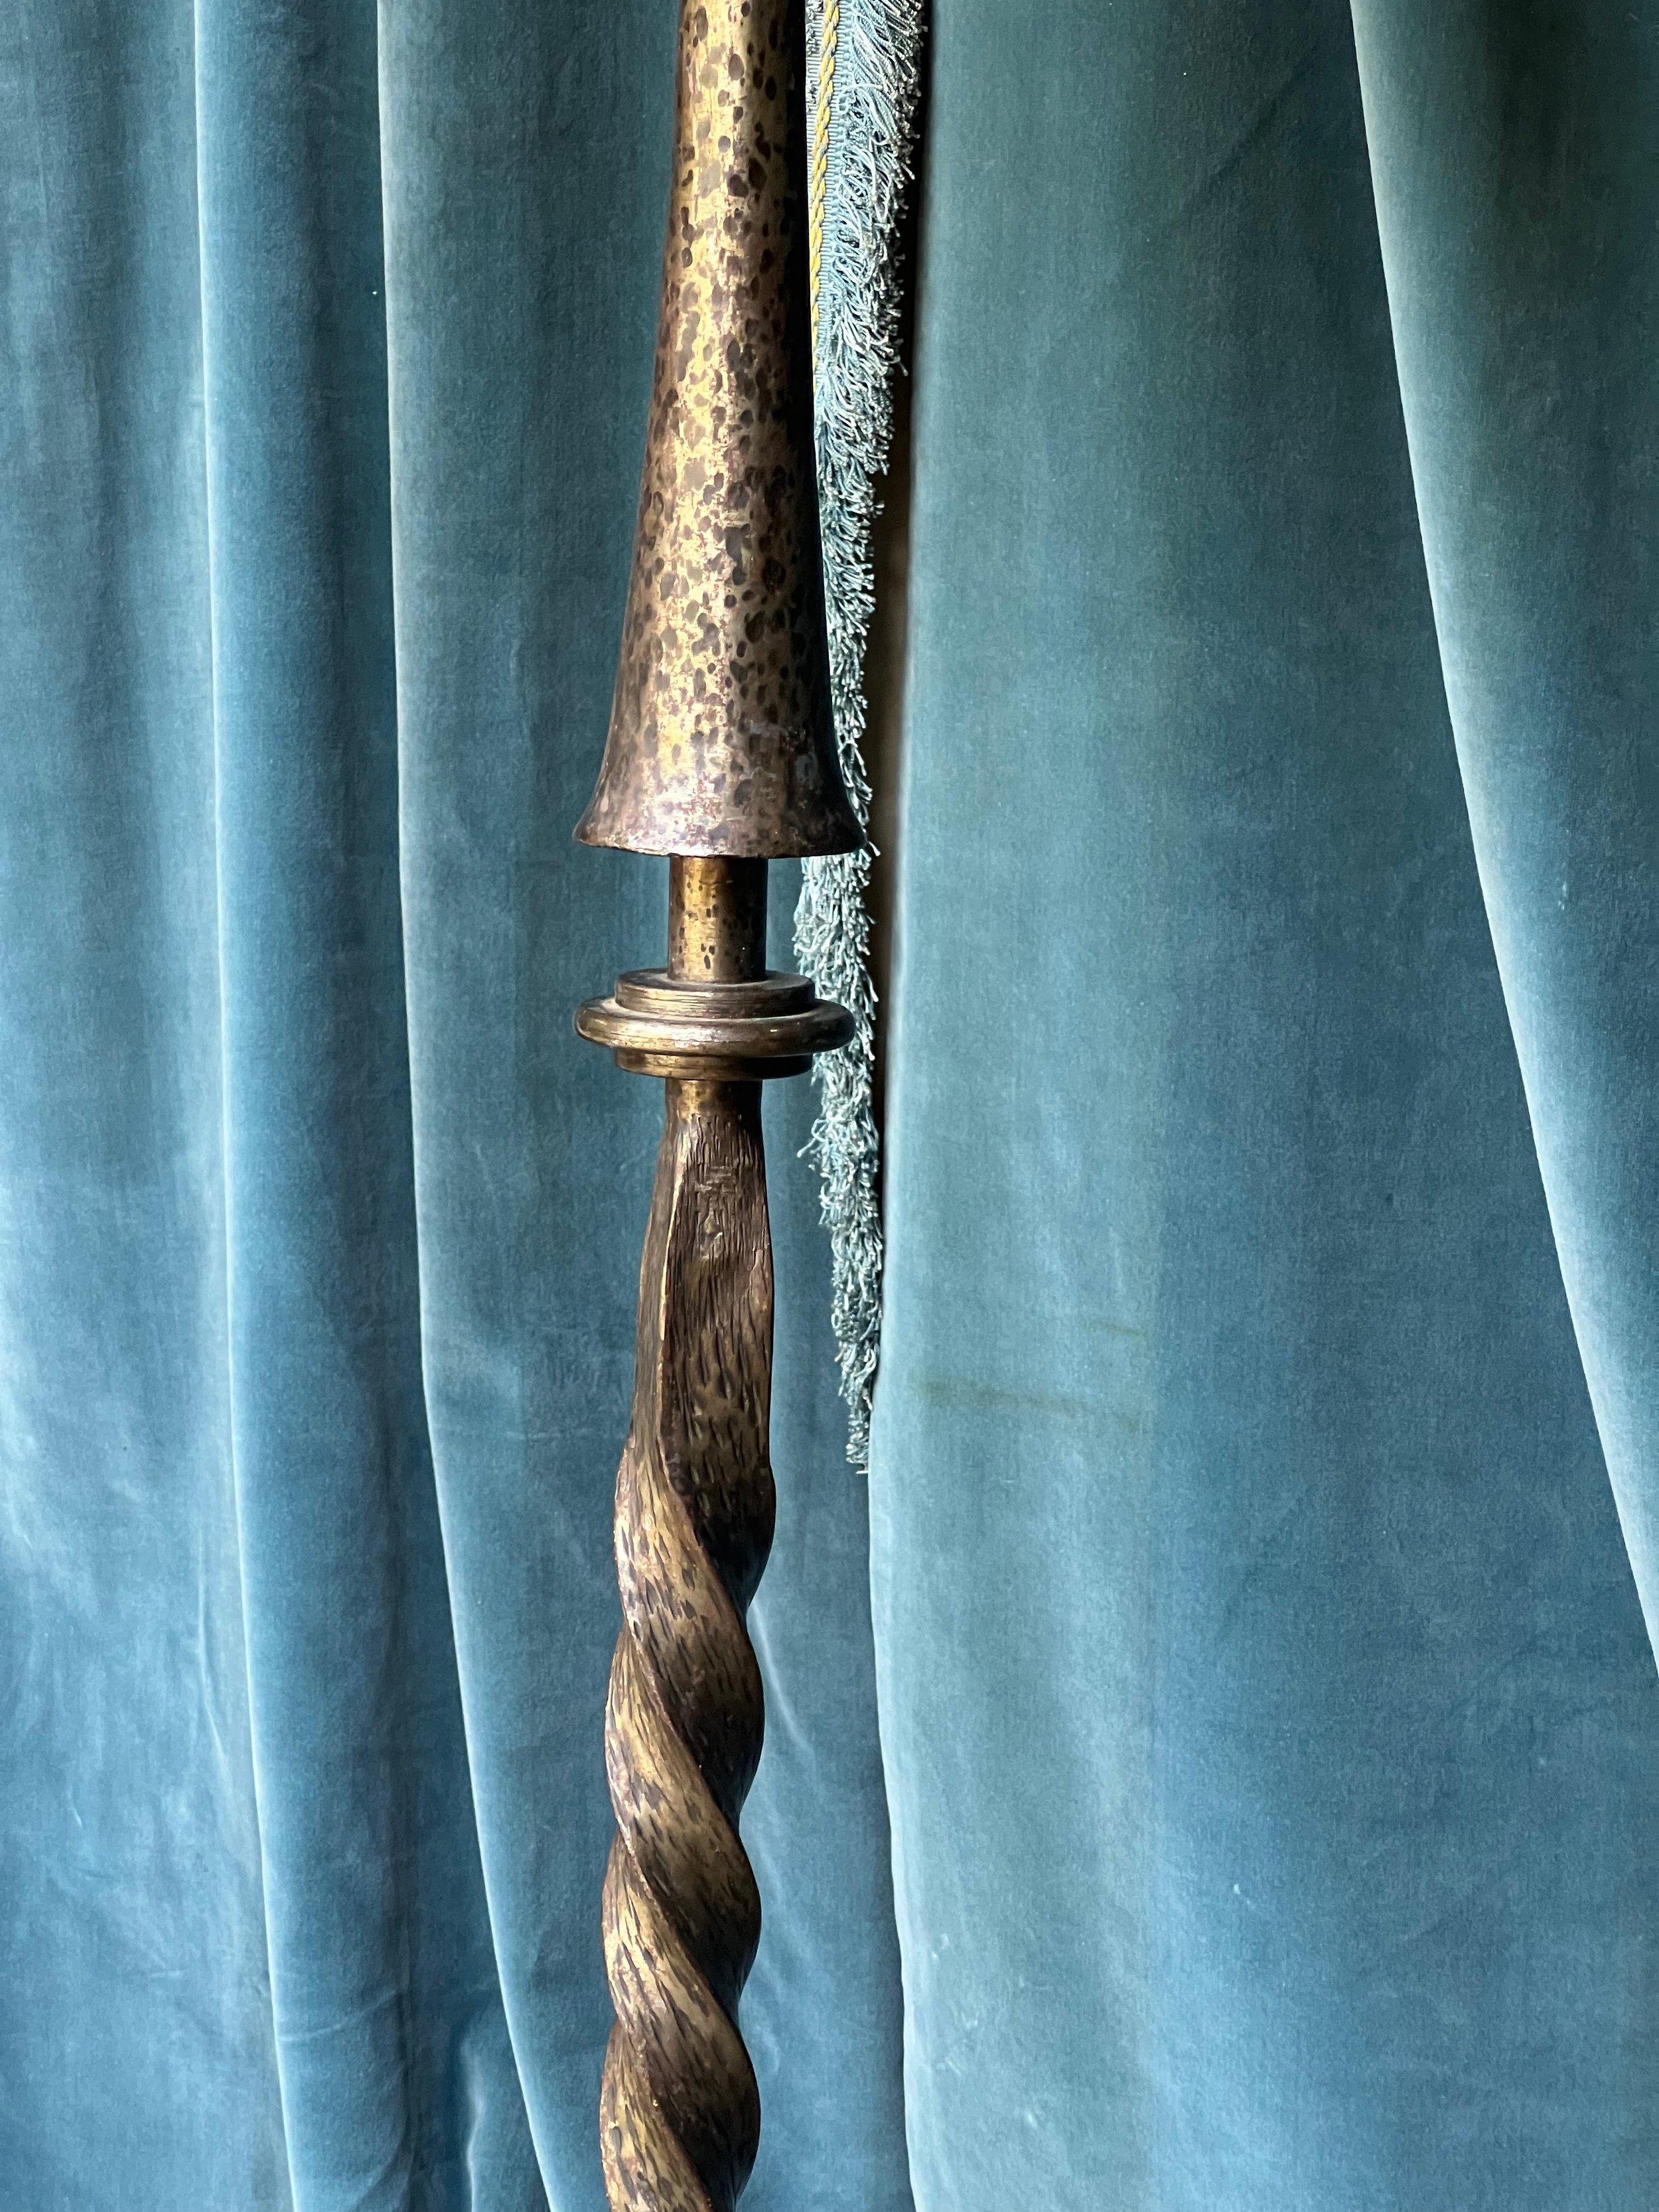 French 1950s Modernist Iron Floor Lamp For Sale 3